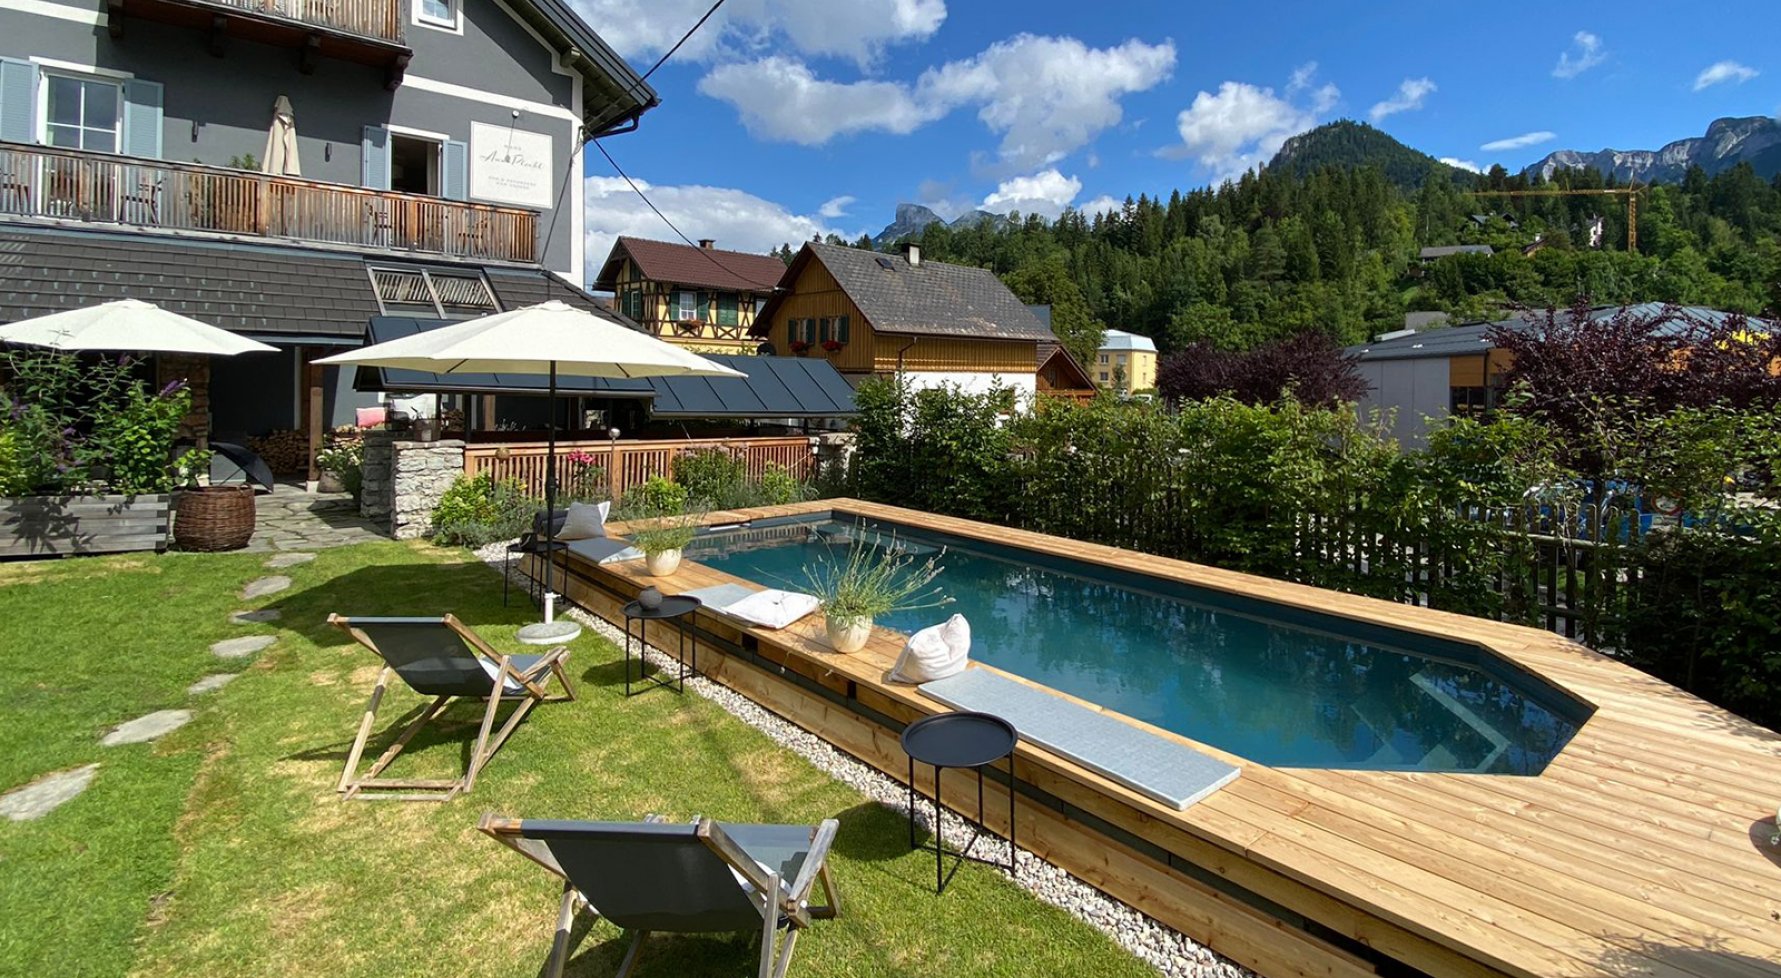 Property in 8990 Bad Aussee / Salzkammergut: Fully equipped boutique guesthouse in Ausseer Land - picture 1